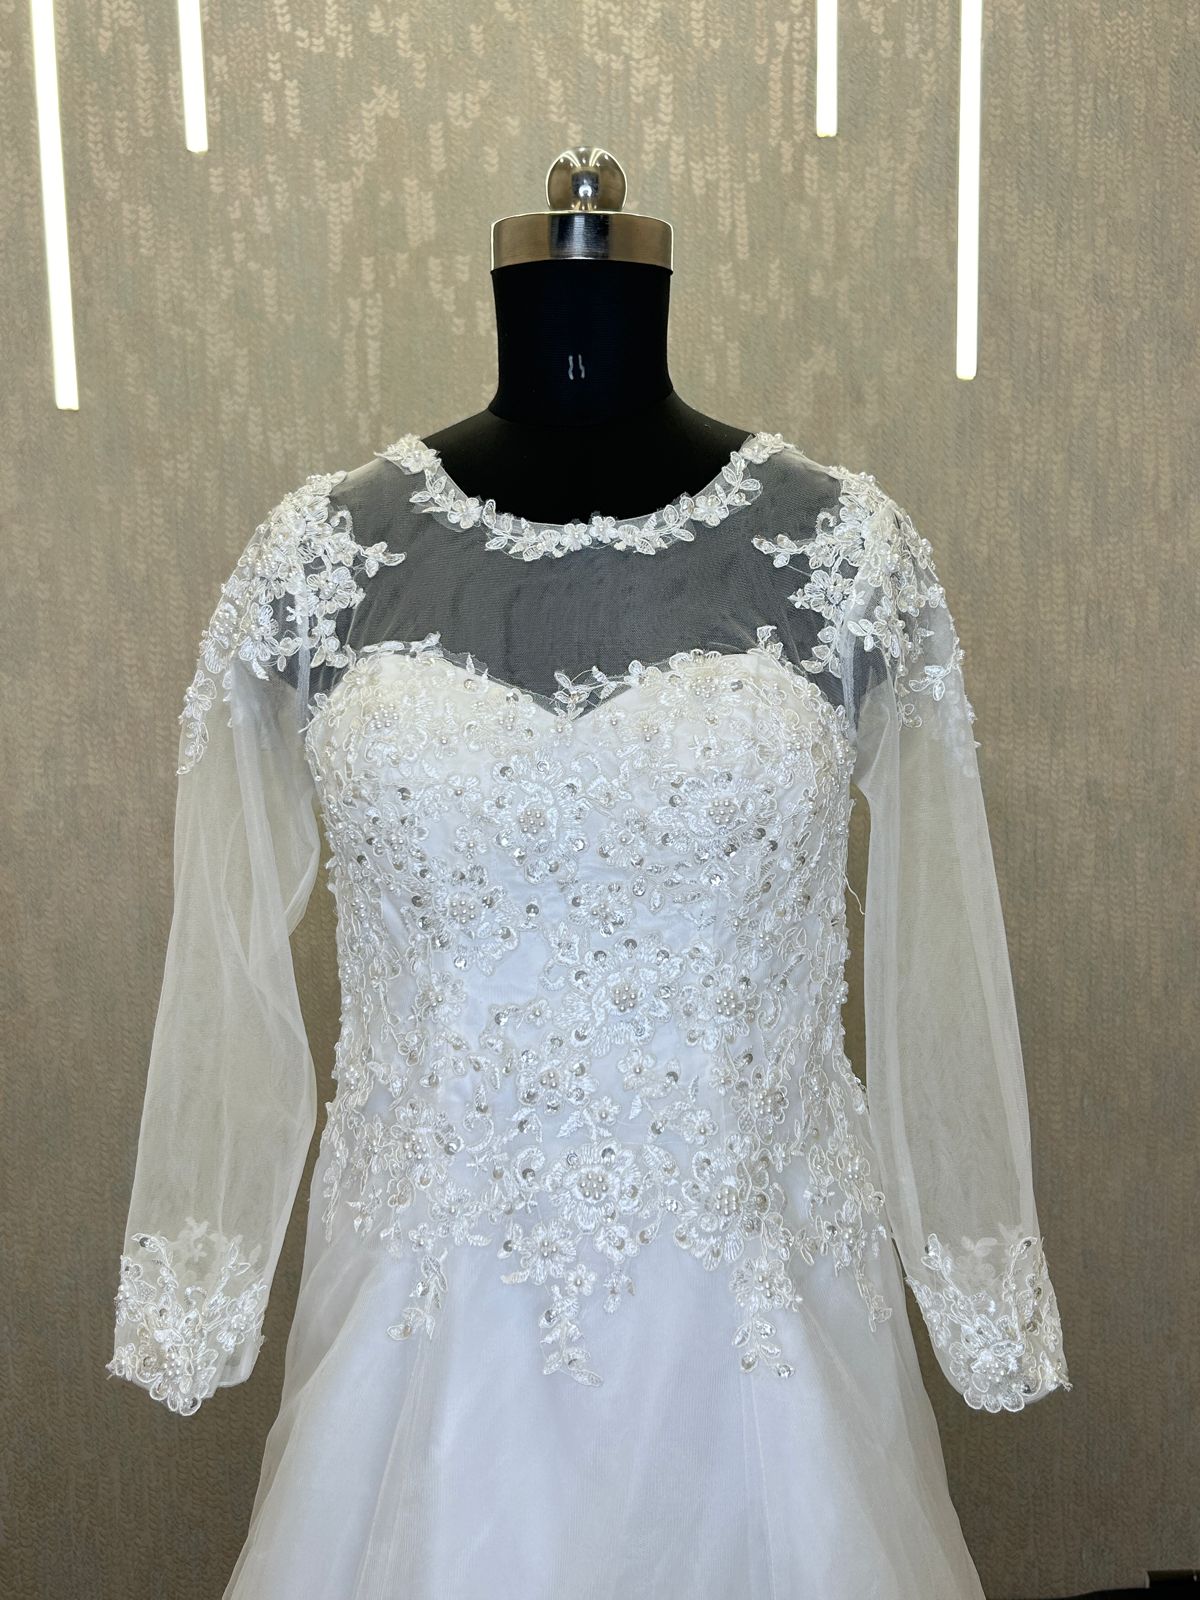 Buy now christian wedding gowns Banglore